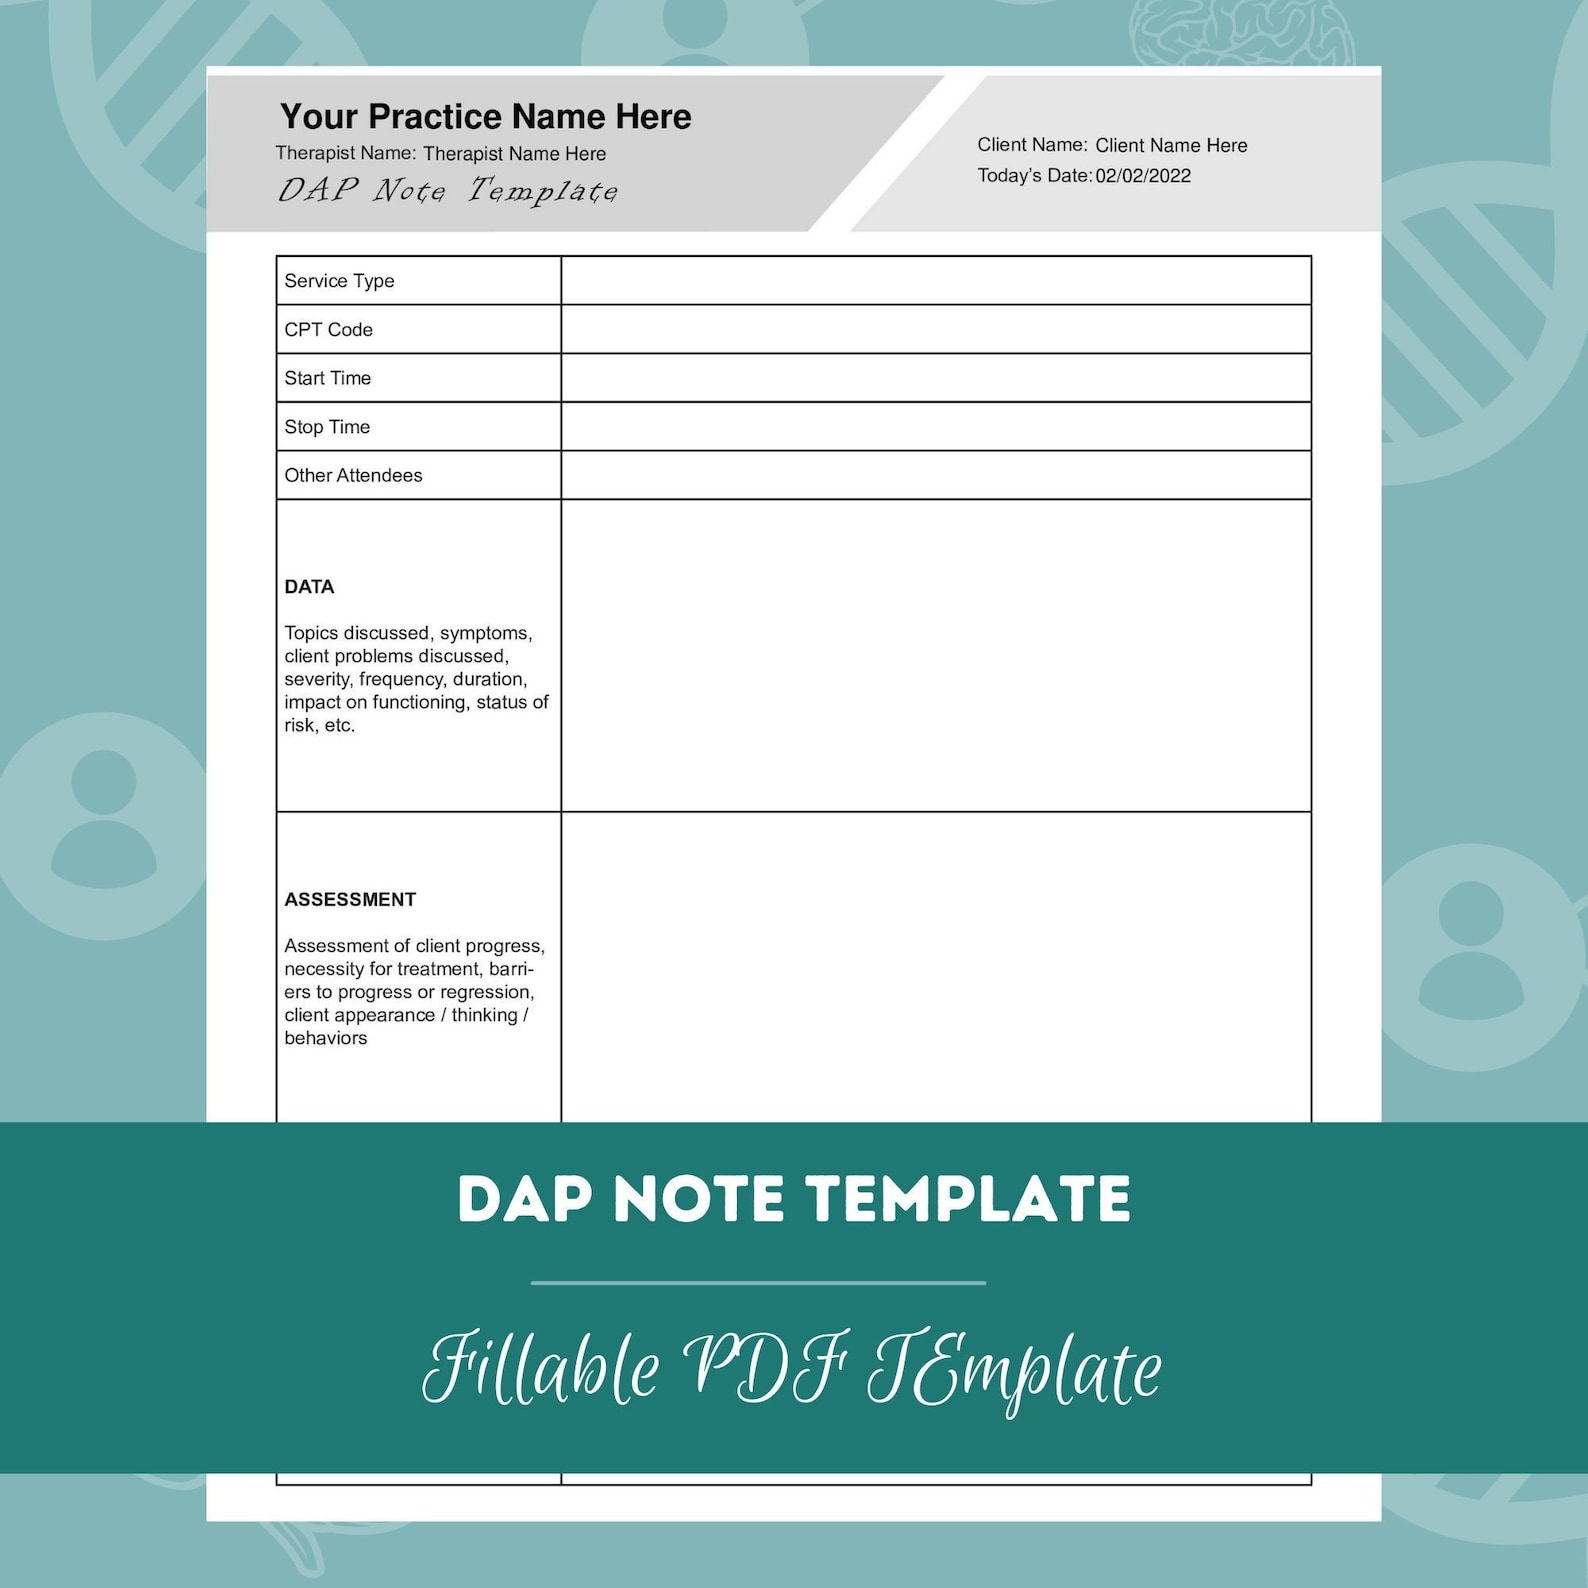 dap-note-template-editable-fillable-pdf-template-for-etsy